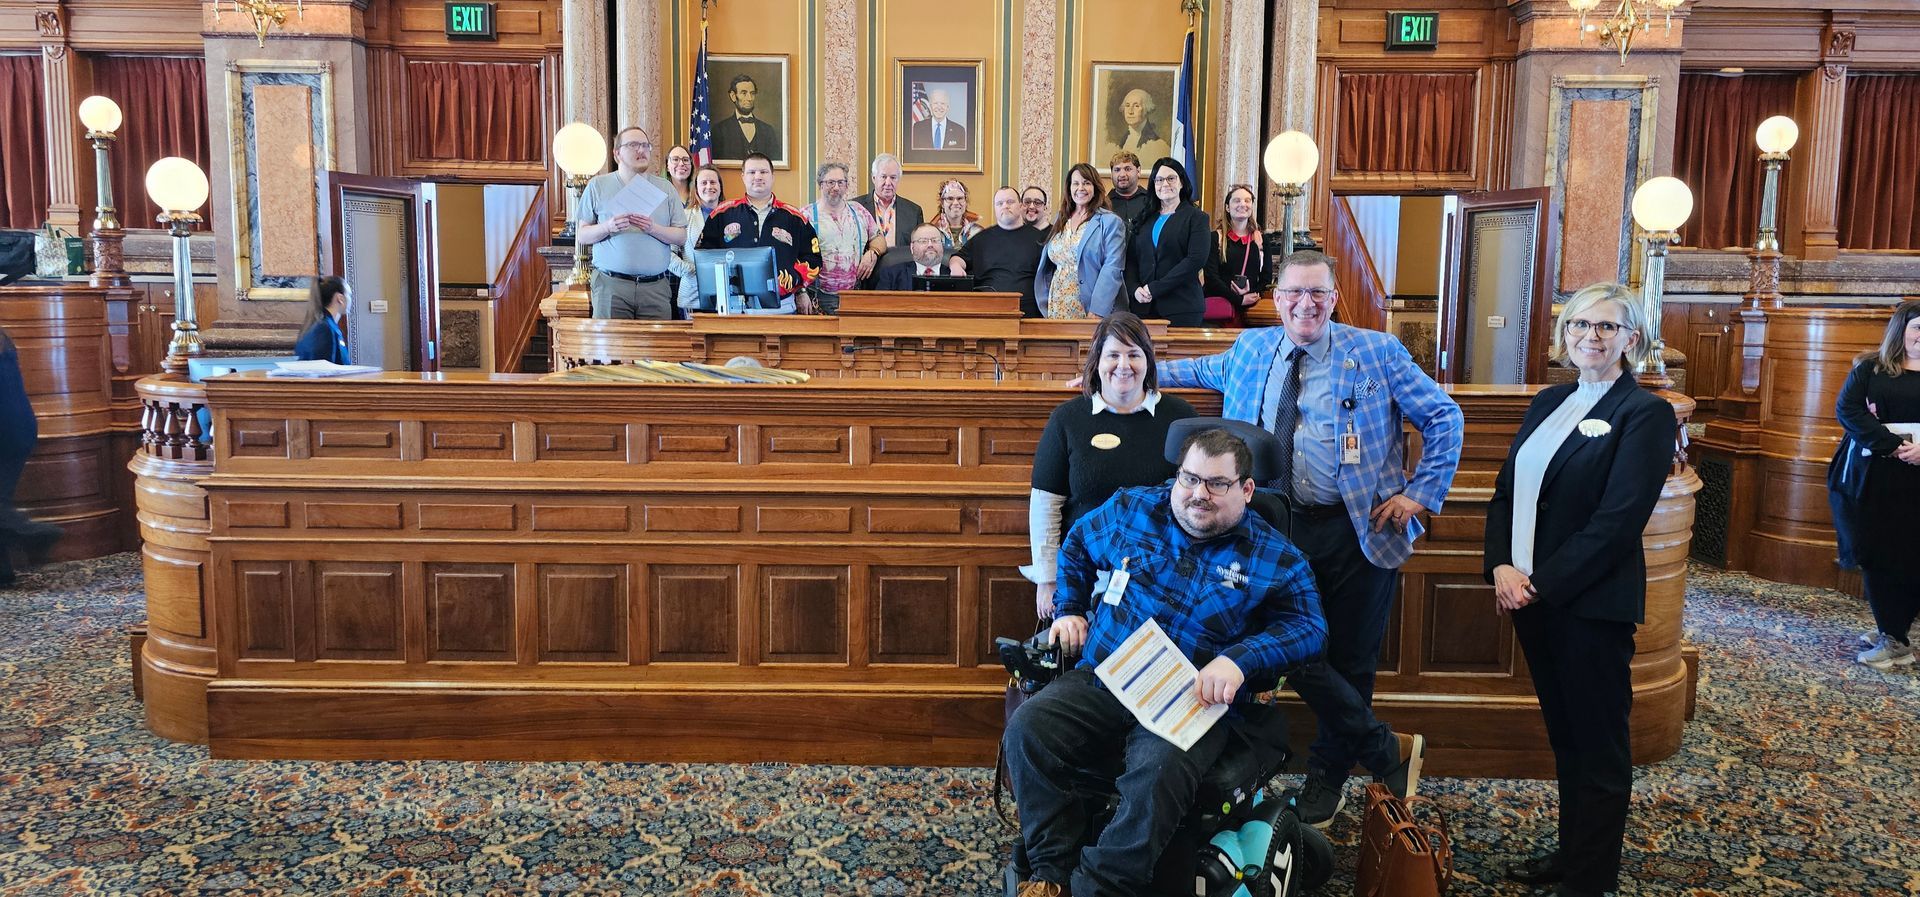 Photo of Speaker's seat in the Iowa House of Representatives with advocates and legislators gathered around. In the forefront is a man in a wheelchair and three others.